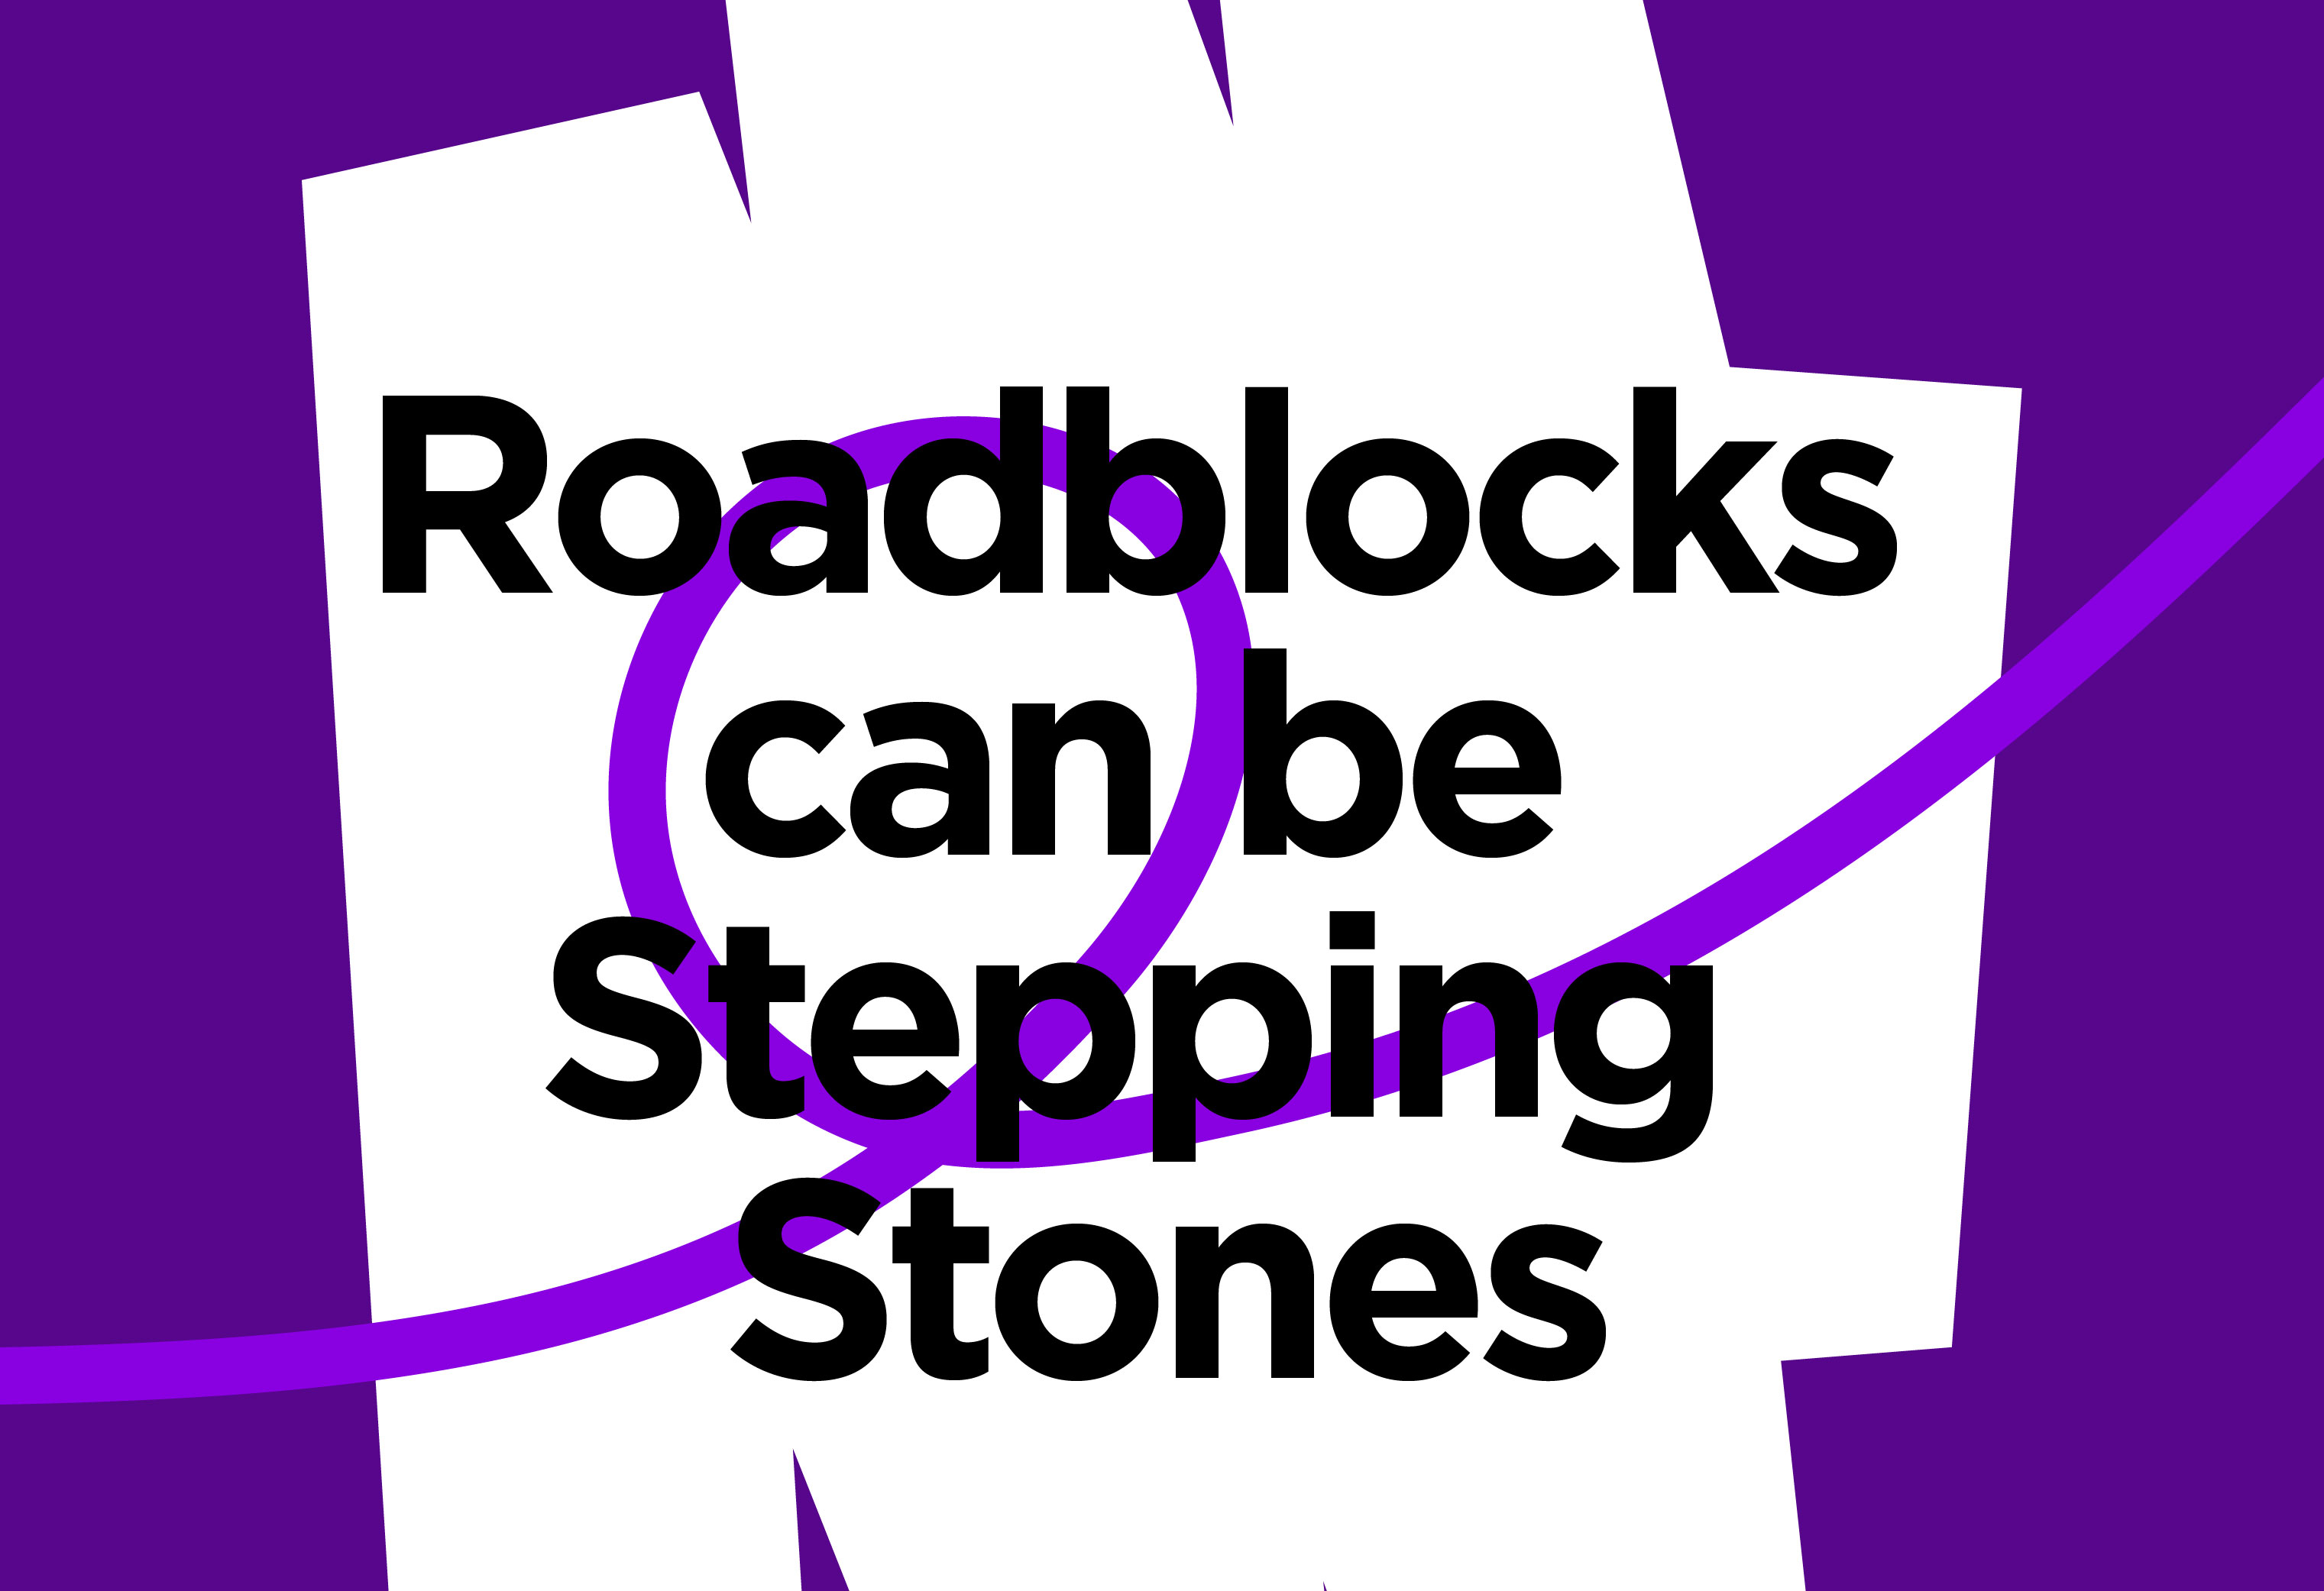 roadblocks can be stepping stones